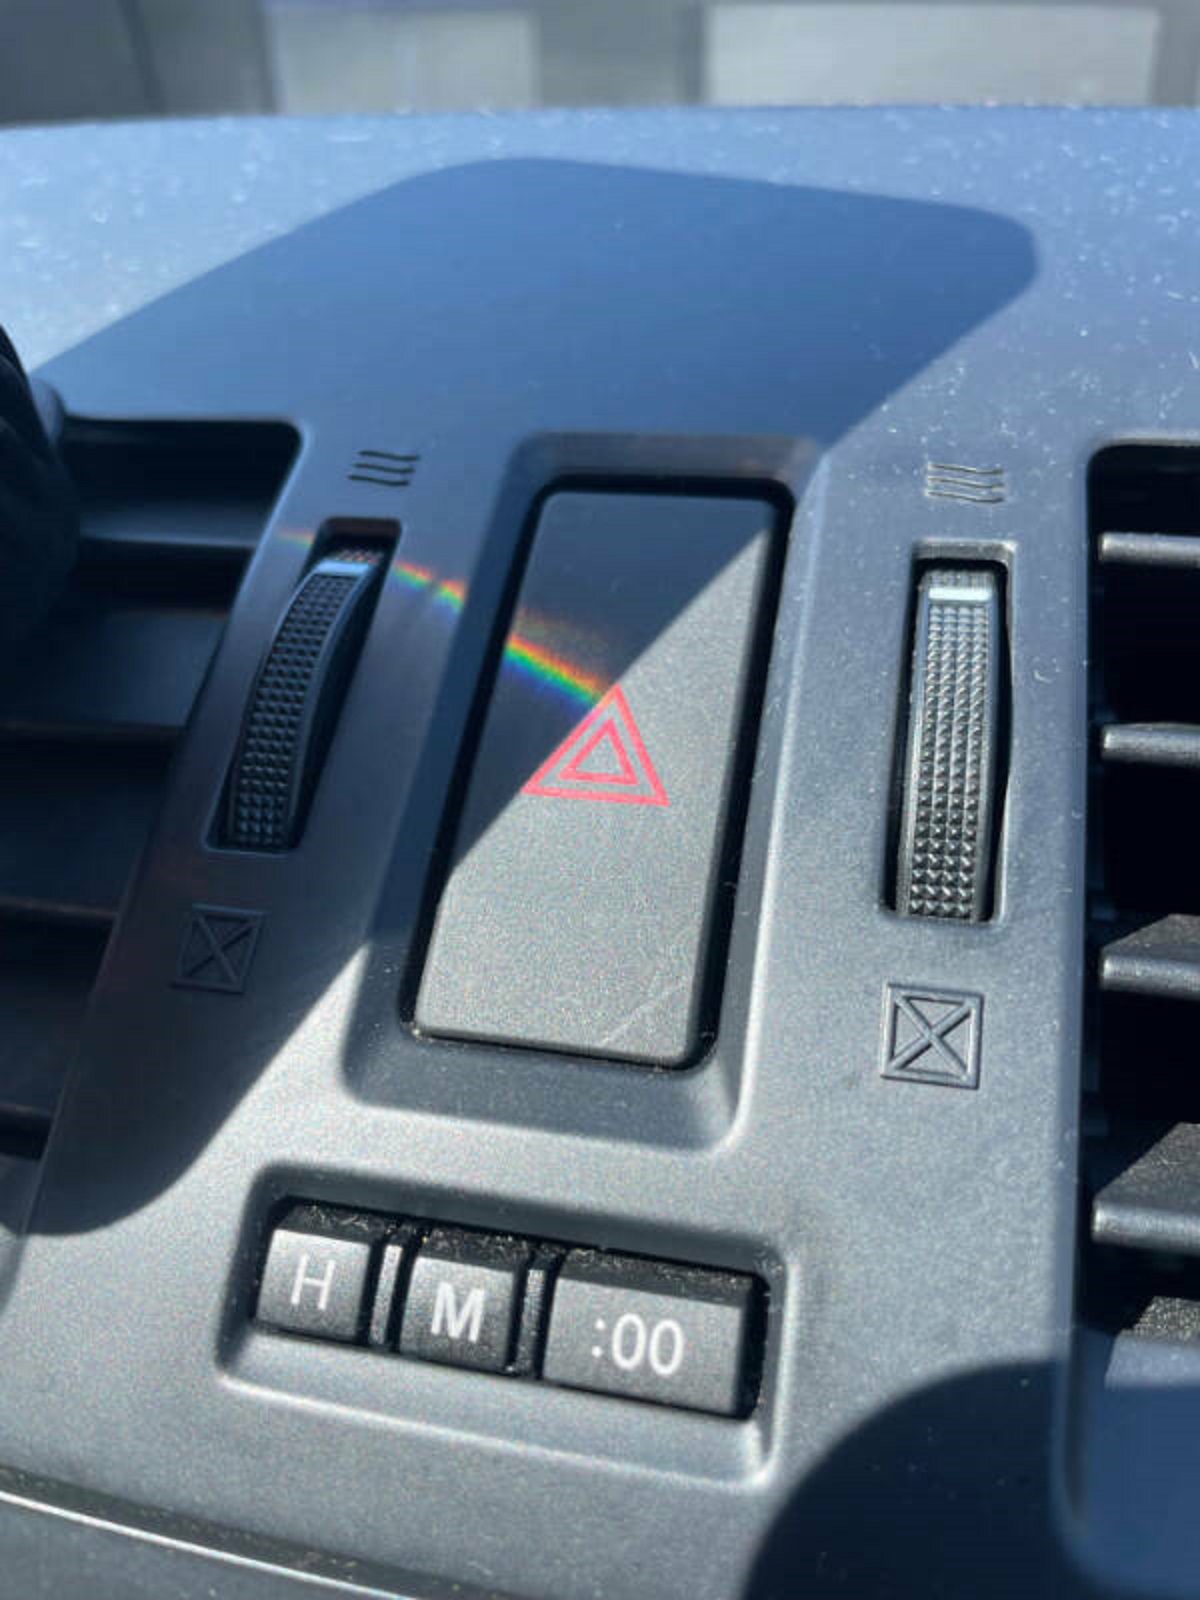 “A reflection from my friend’s phone created a Pink Floyd album cover on her hazard button”